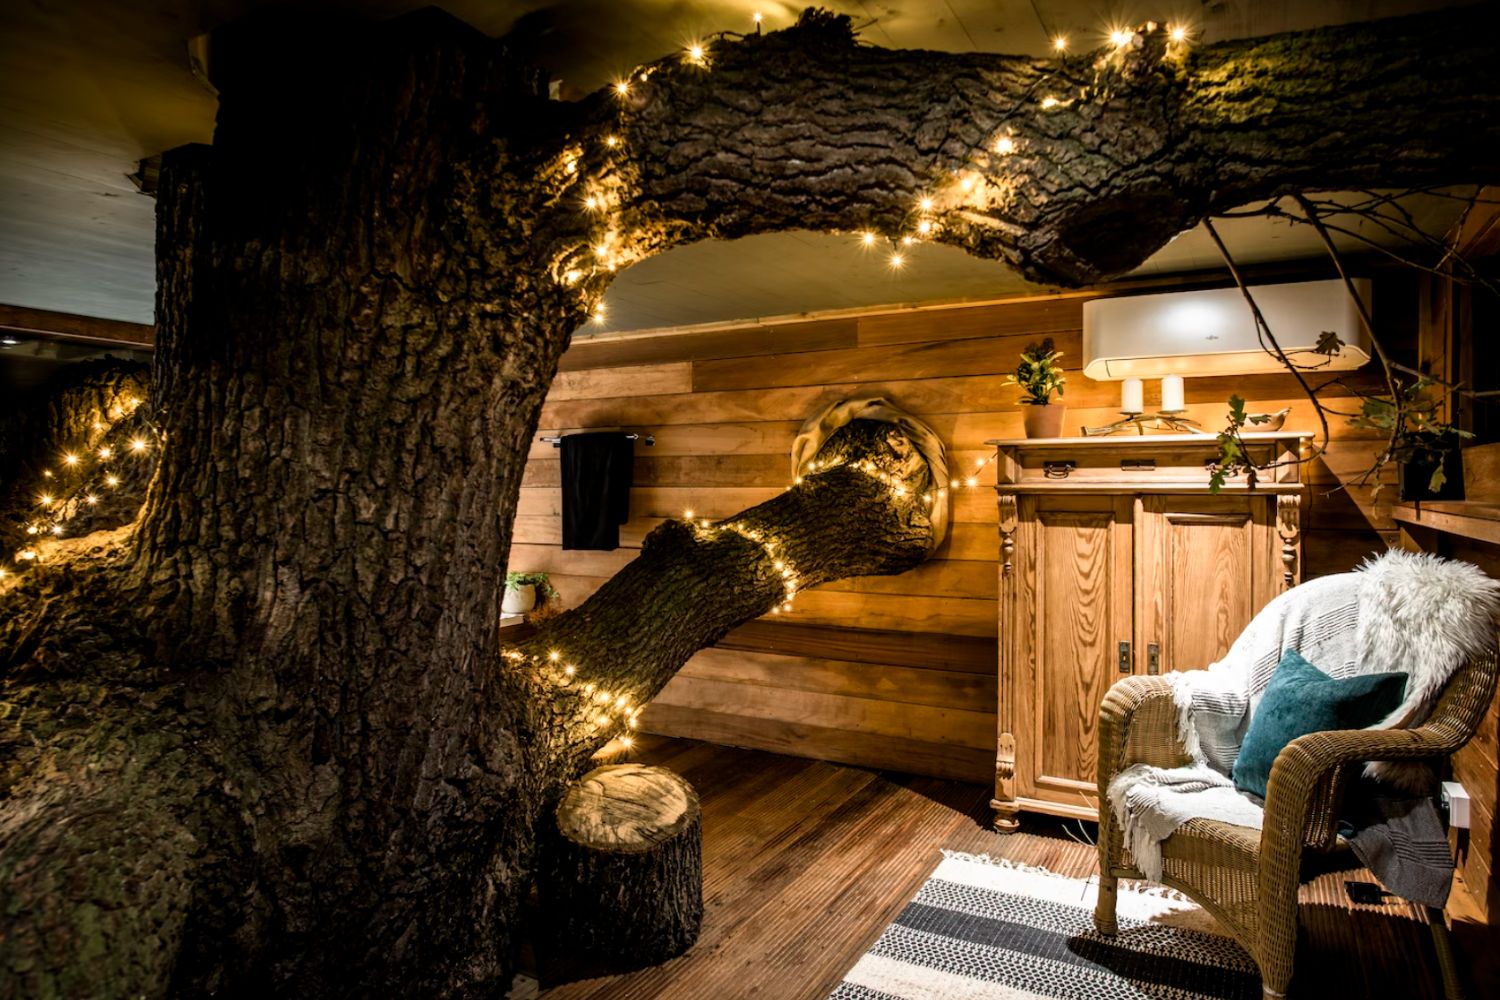 Treehouse living with tree with fairy lights growing through it - The Old Oak Treehouse, Coleman’s Farm, Essex, England